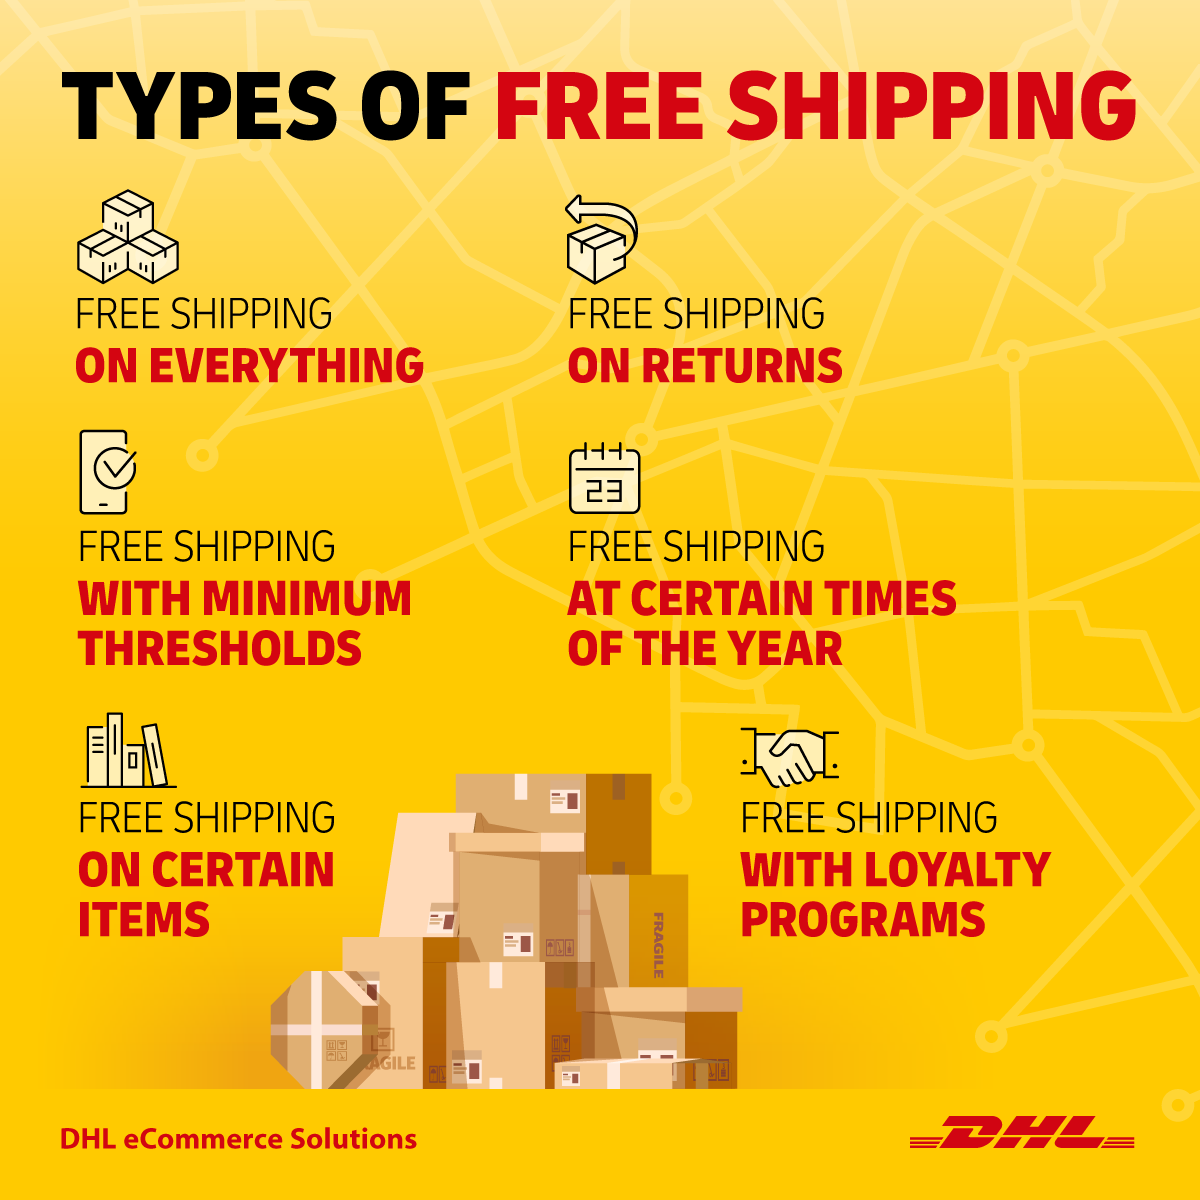 dhl ecommerce customer service number canada